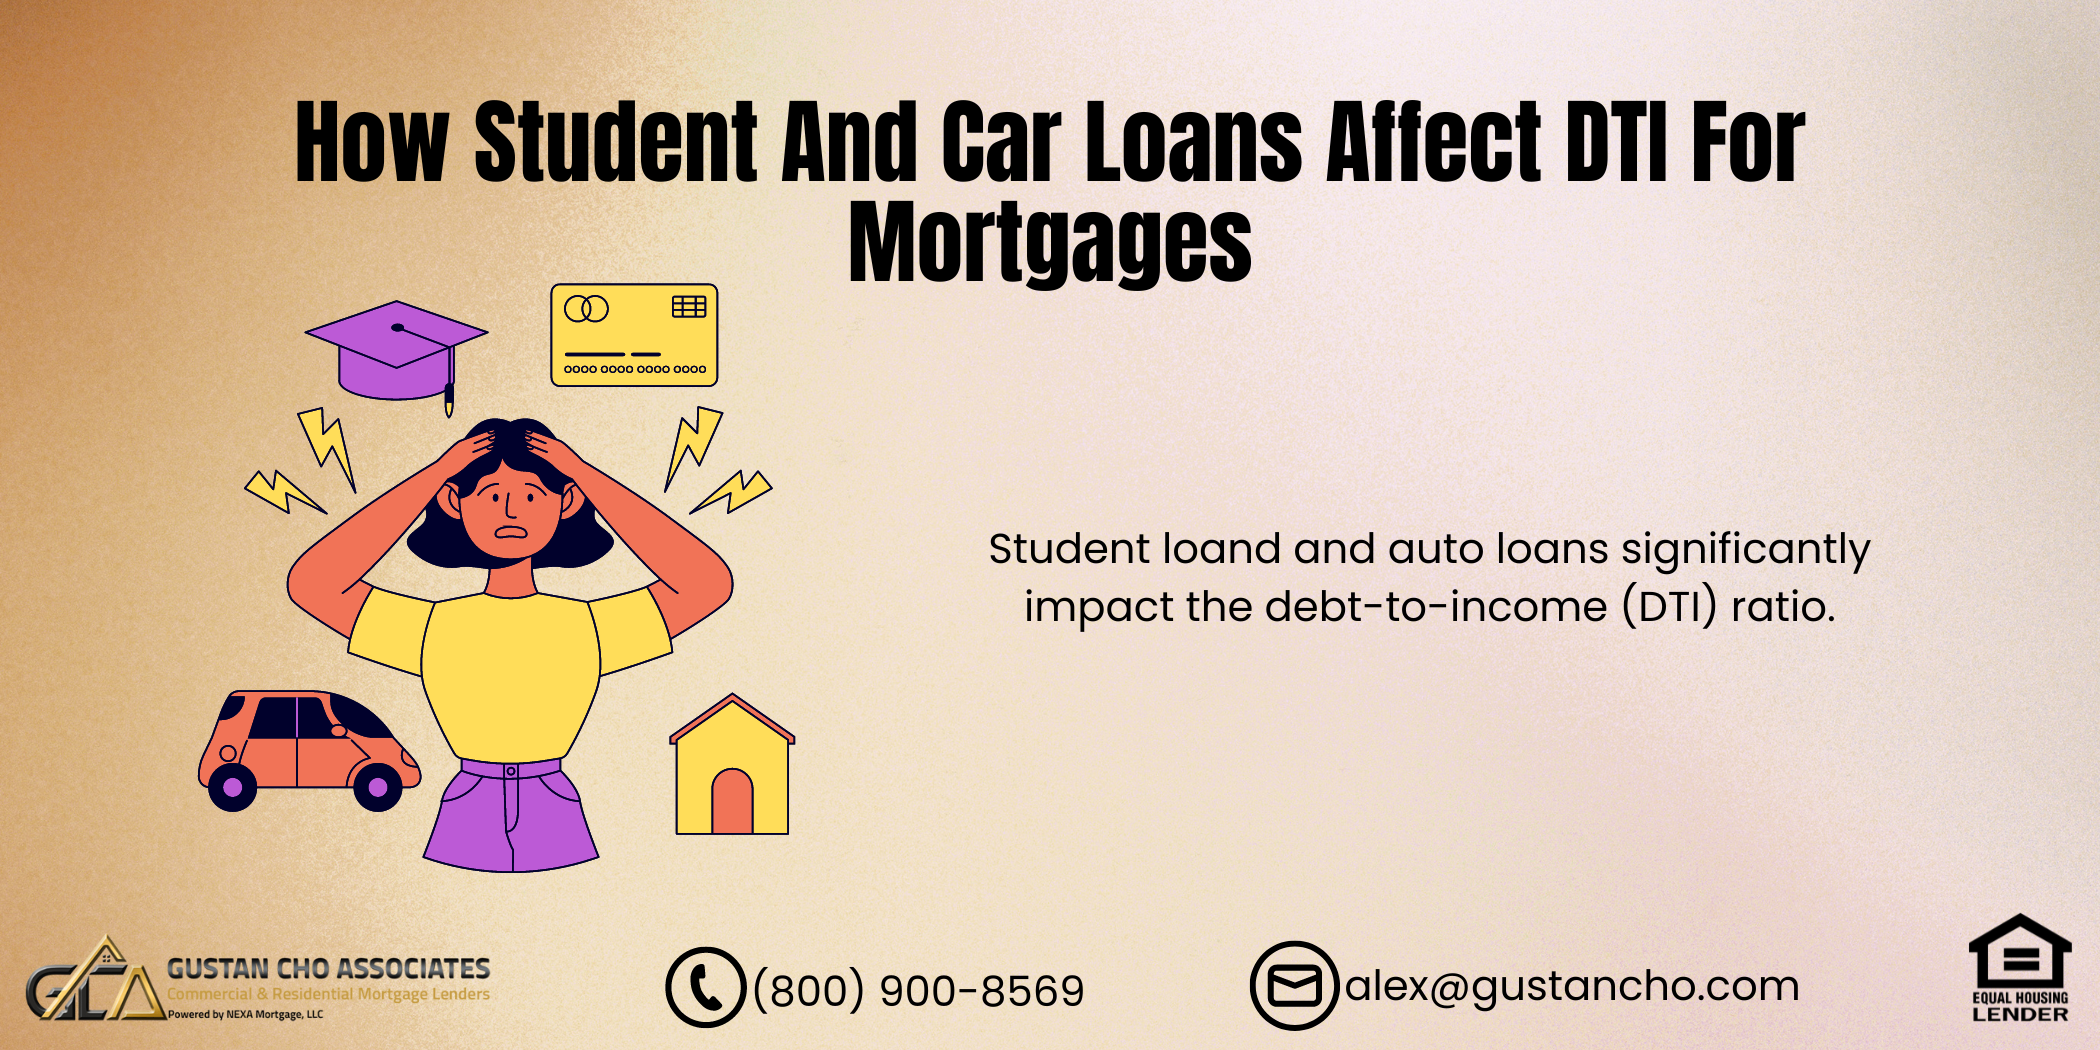 How Student And Car Loans Affect DTI